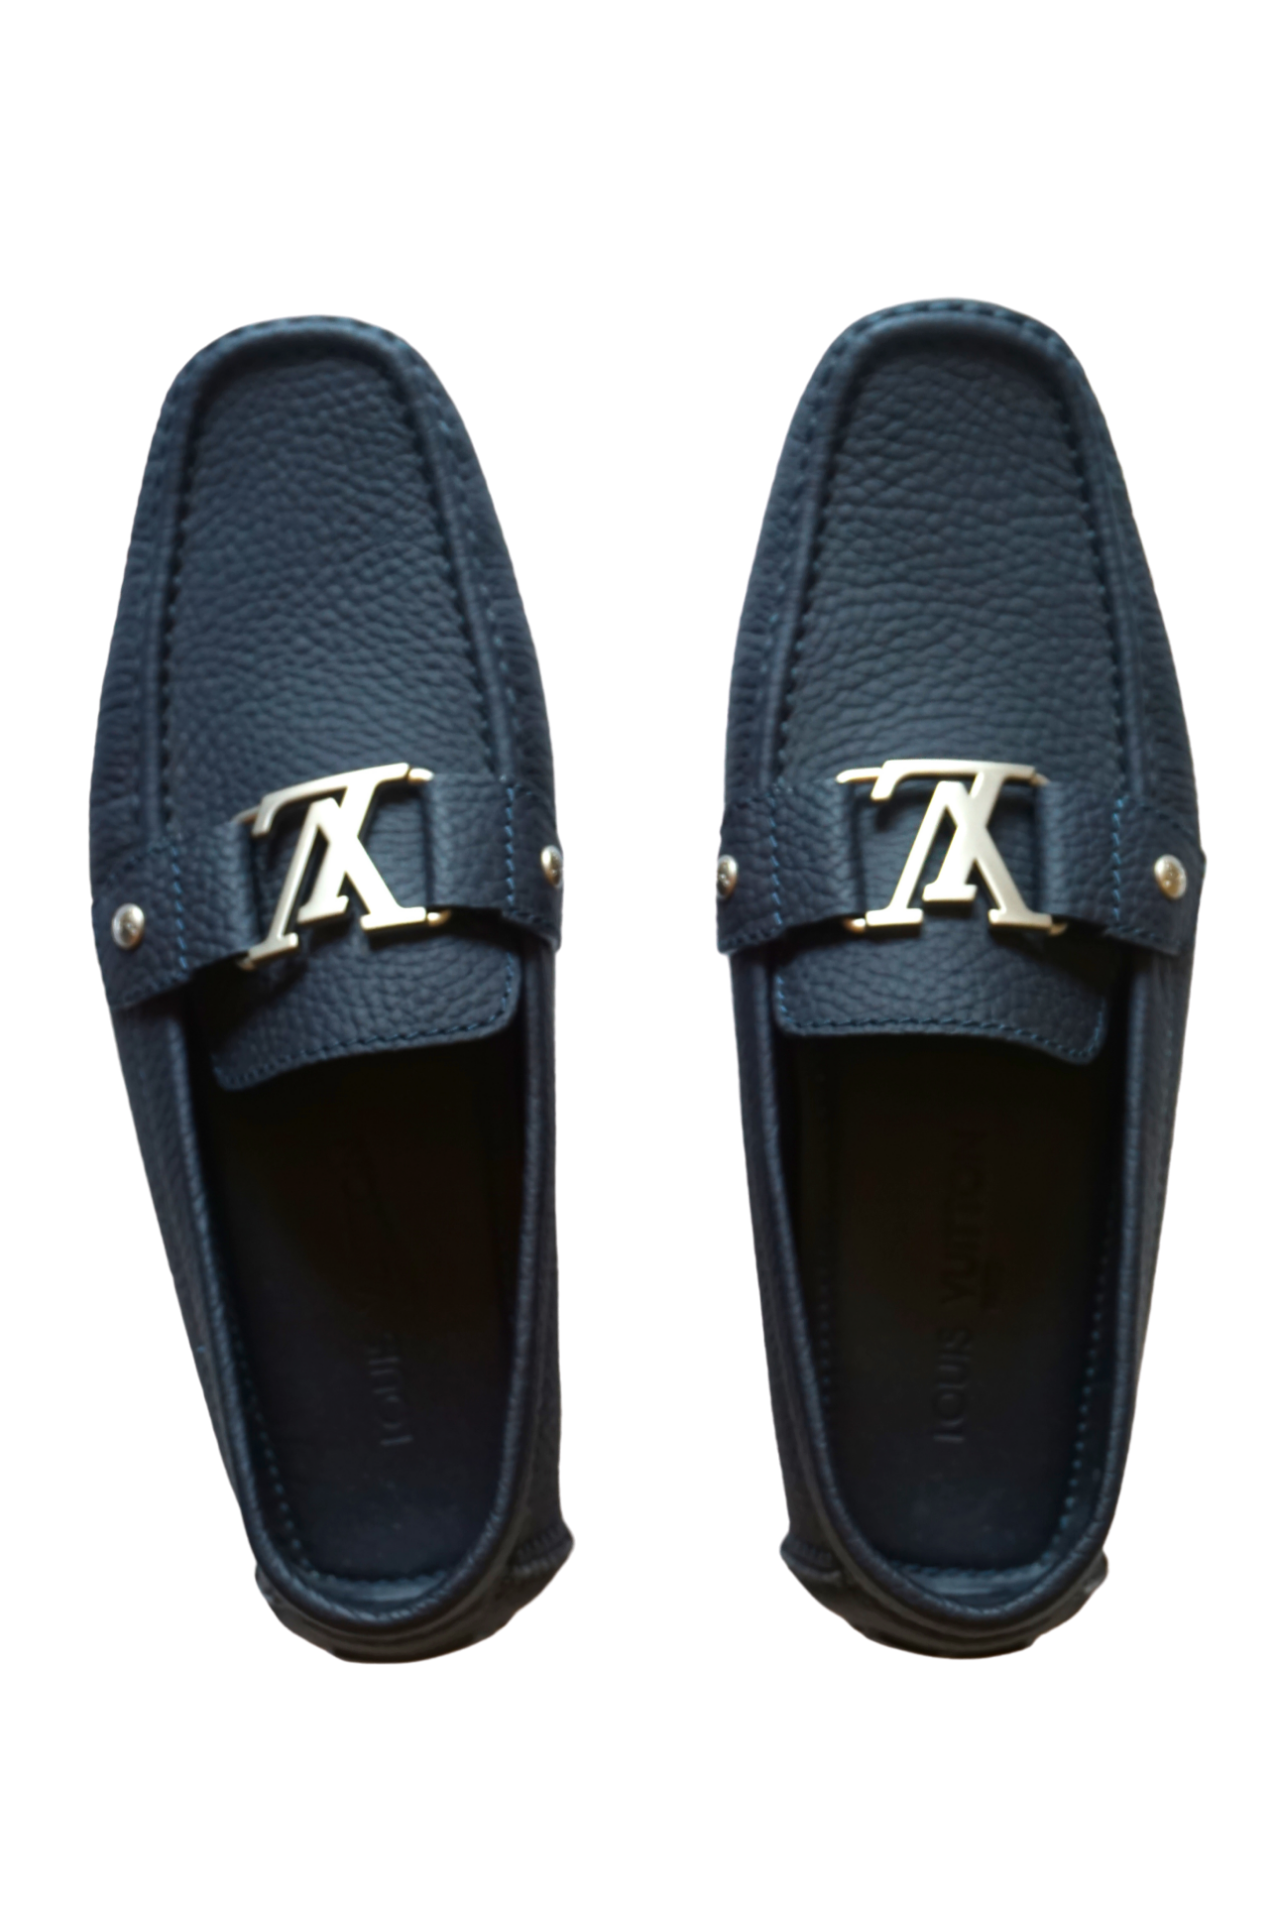 Louis Vuitton Navy Blue Textured Leather Monte Carlo Moccasins Size 42